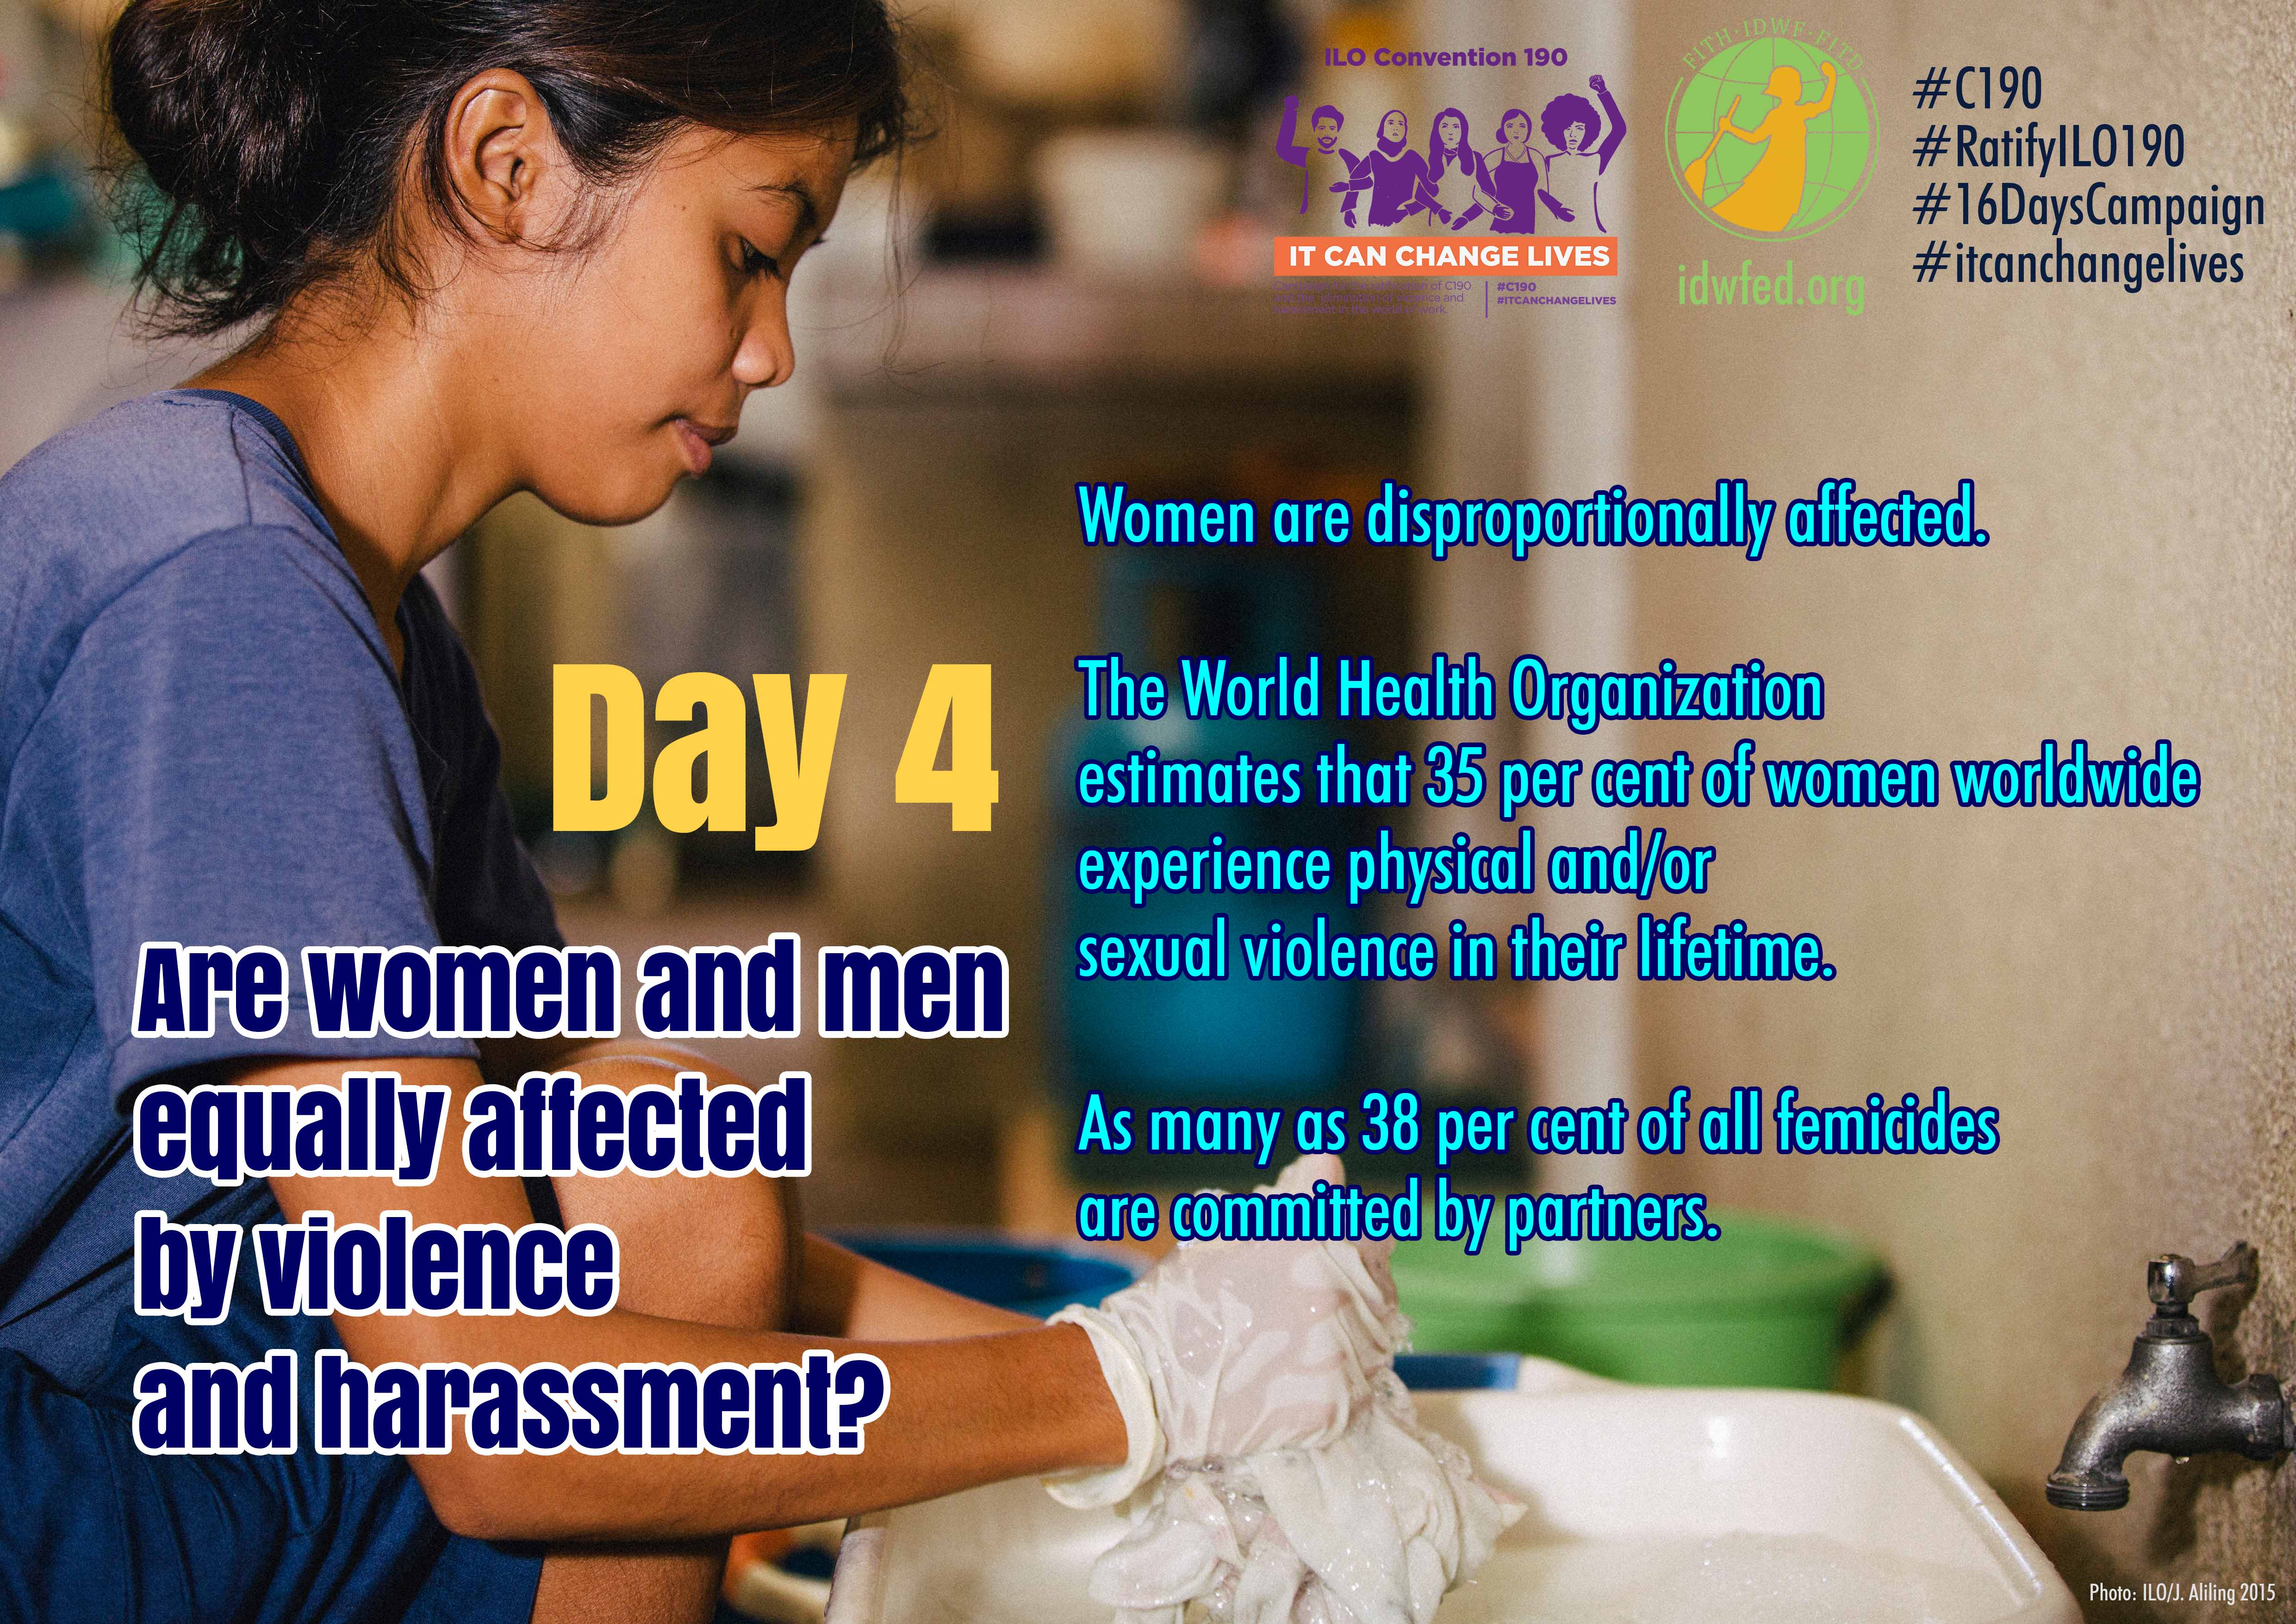 4. Are women and men equally affected by violence and harassment?